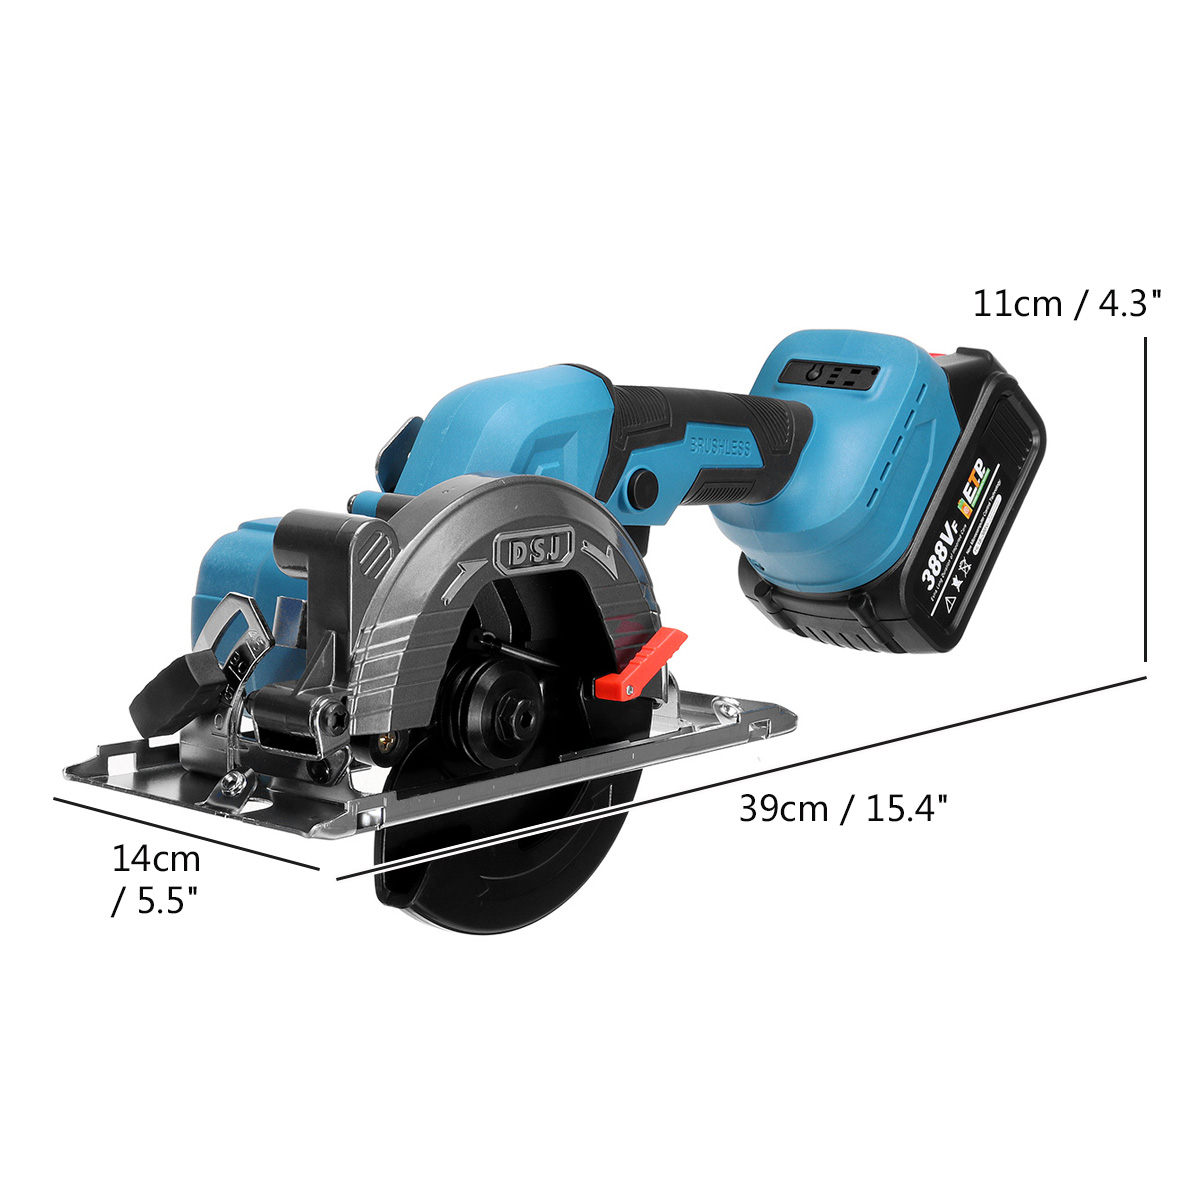 Electric-Circular-Saw-388VF-125mm-Saw-Blade-Brushless-Multi-Angle-Cutting-Suitable-With-18v-Battery-1941553-13